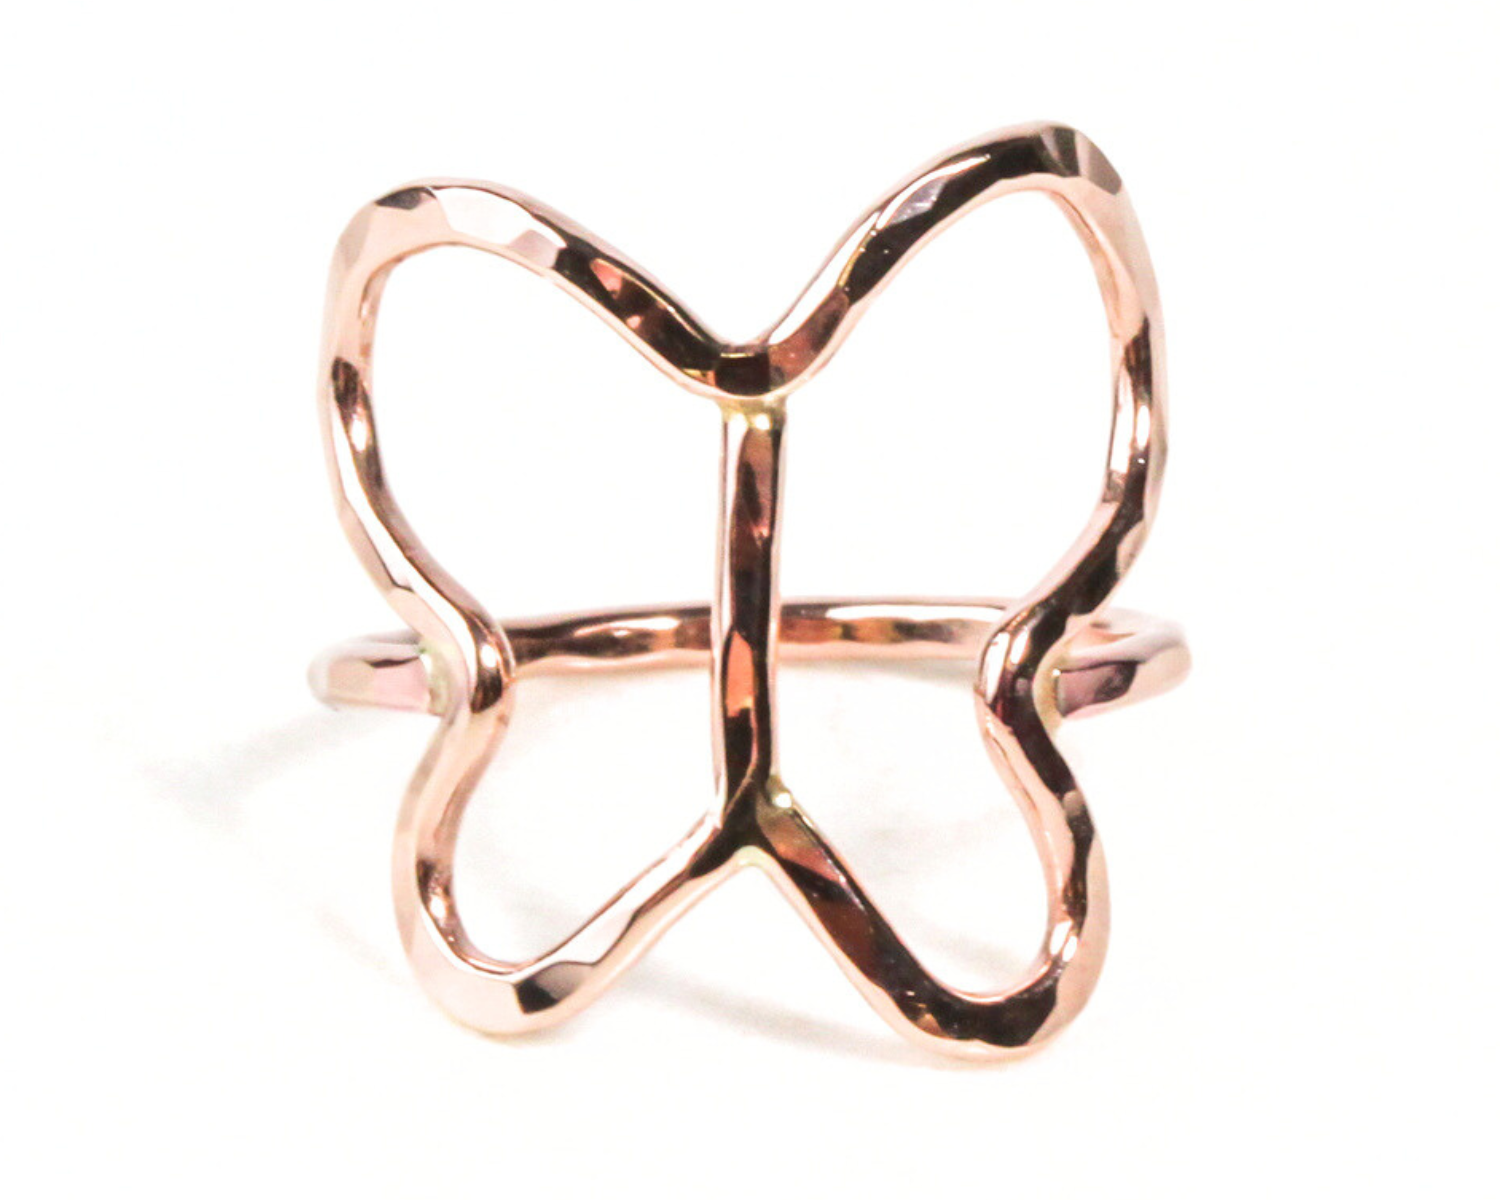 Handcrafted in the USA, this Butterfly Ring is exquisitely handmade with elevated materials to bring the magic of the butterfly to every day. This minimalist butterfly ring wraps your finger in a whimsical embrace. Offered in sterling, gold or rose.